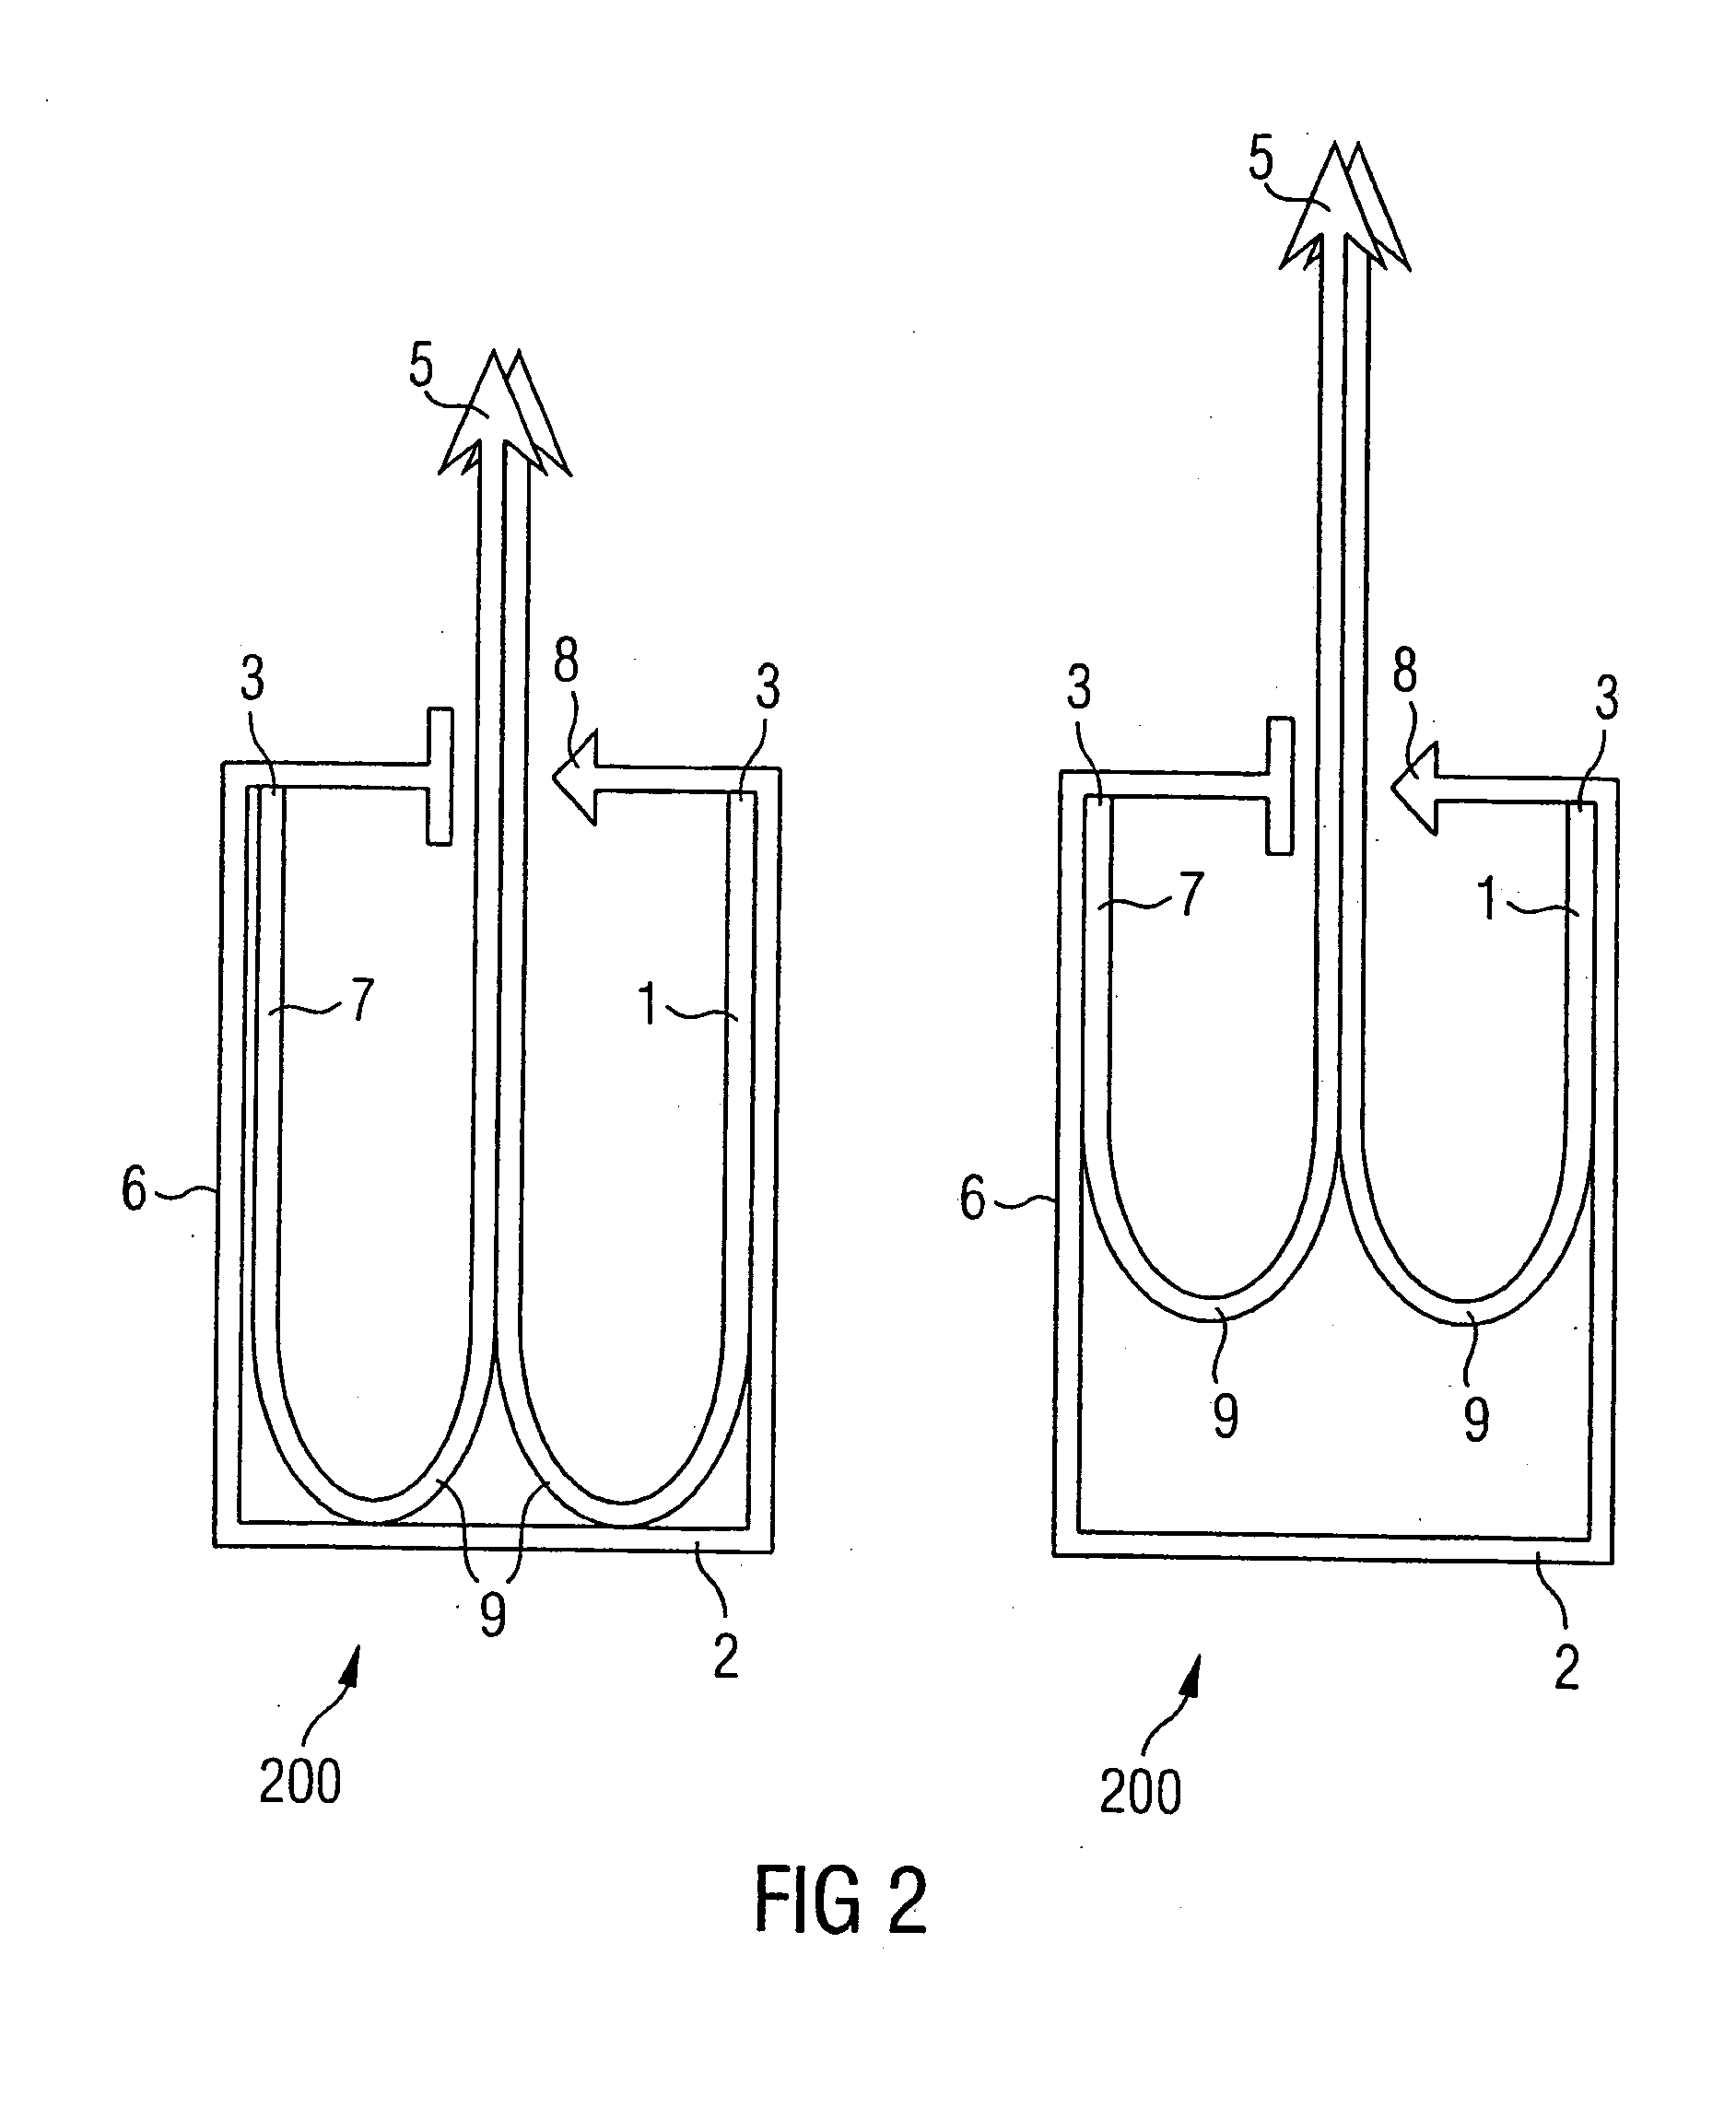 Mounting device for interior equipment in aircraft